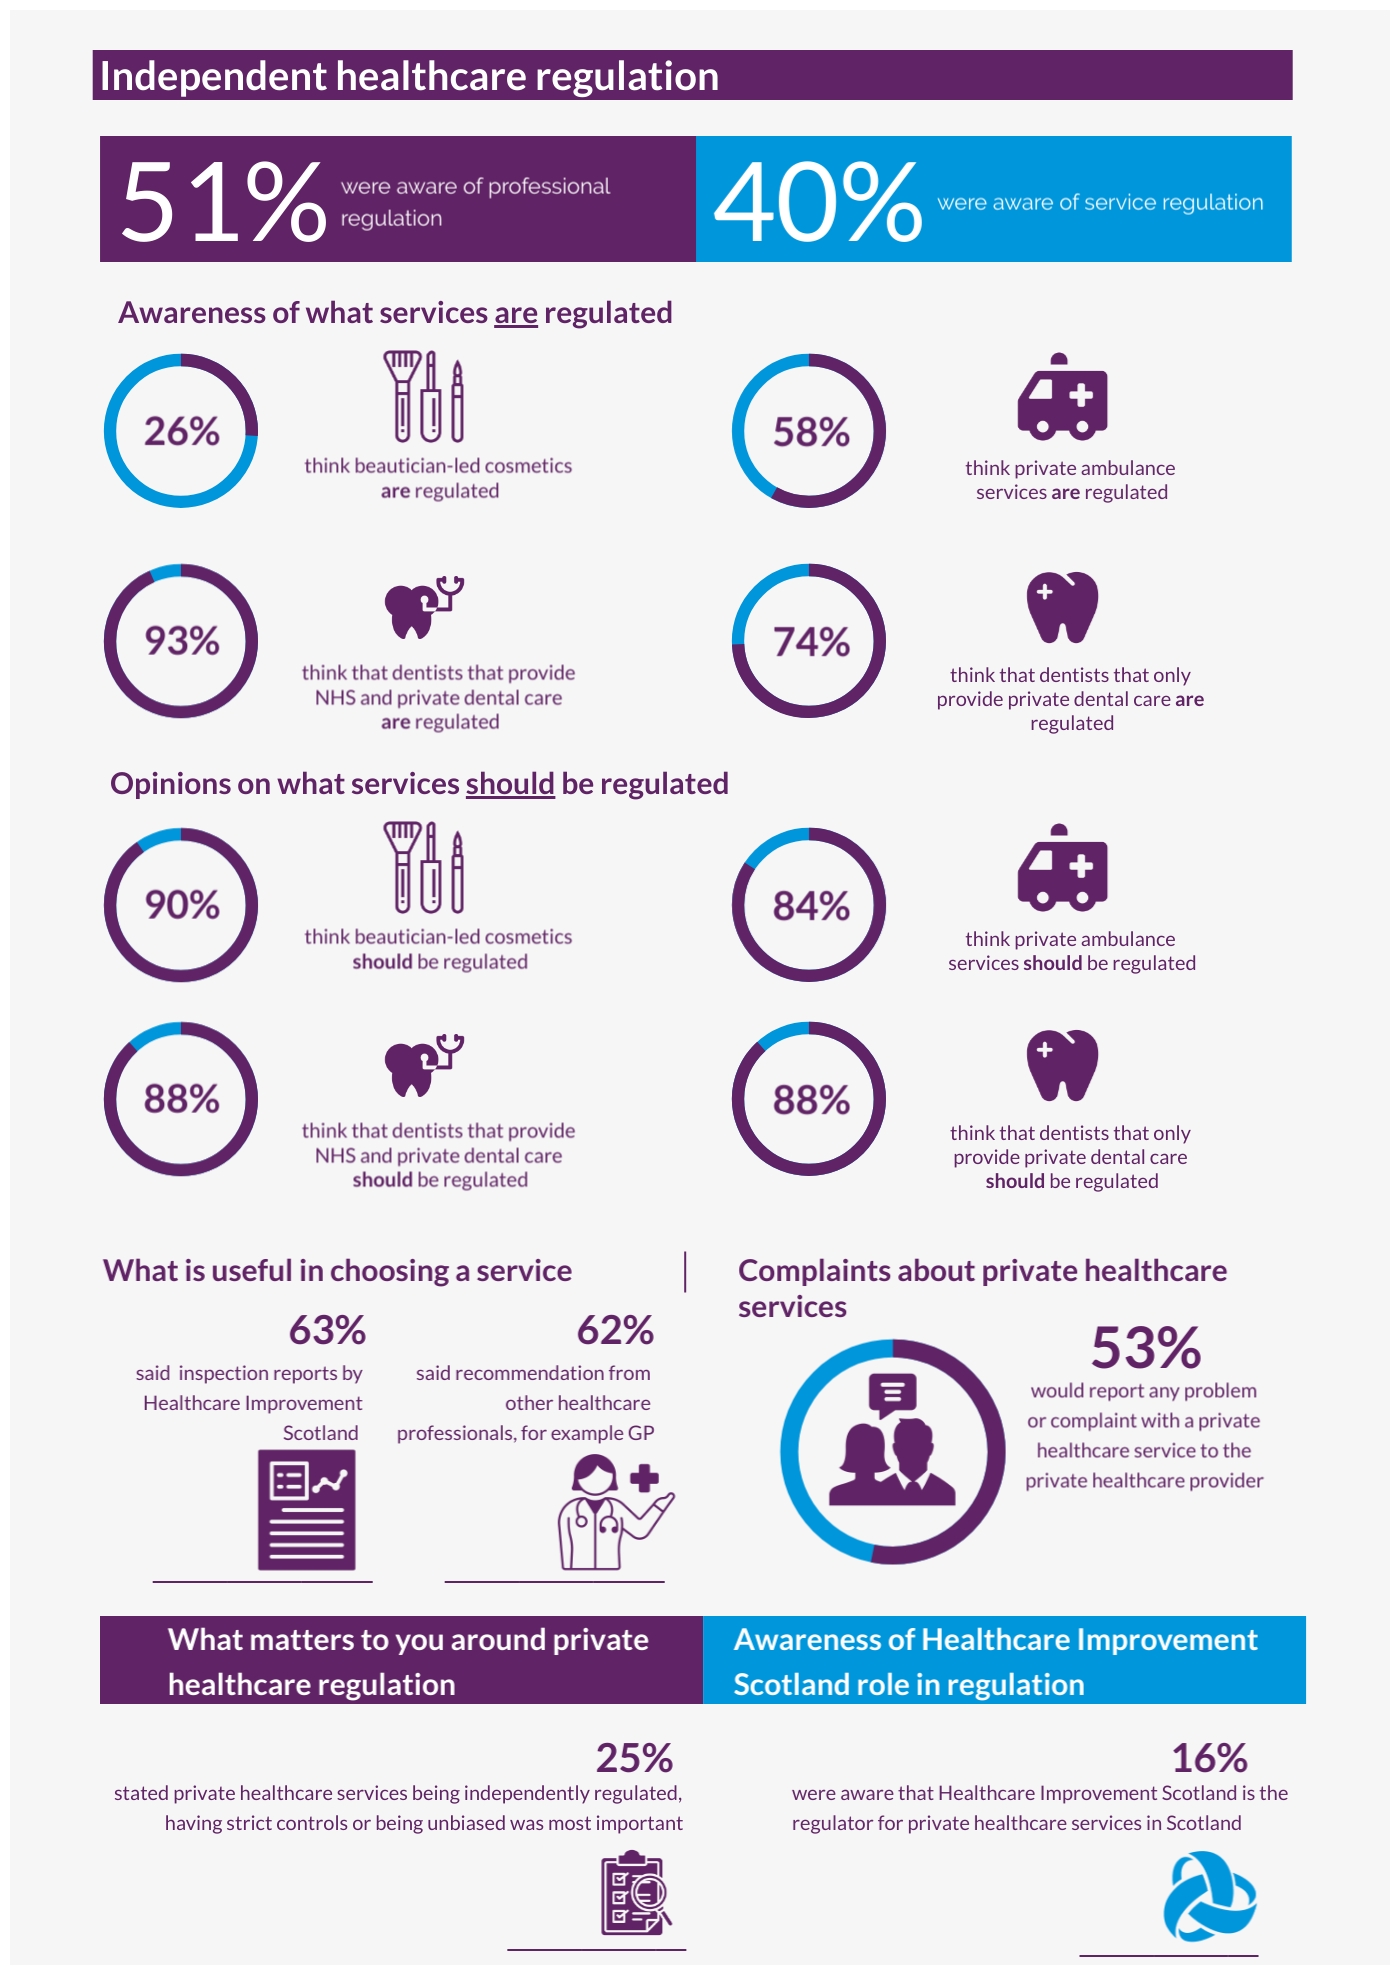 This infographic outlines the key findings for the topic on independent healthcare regulation. All this information is outlined fully on the webpage text and in the report.